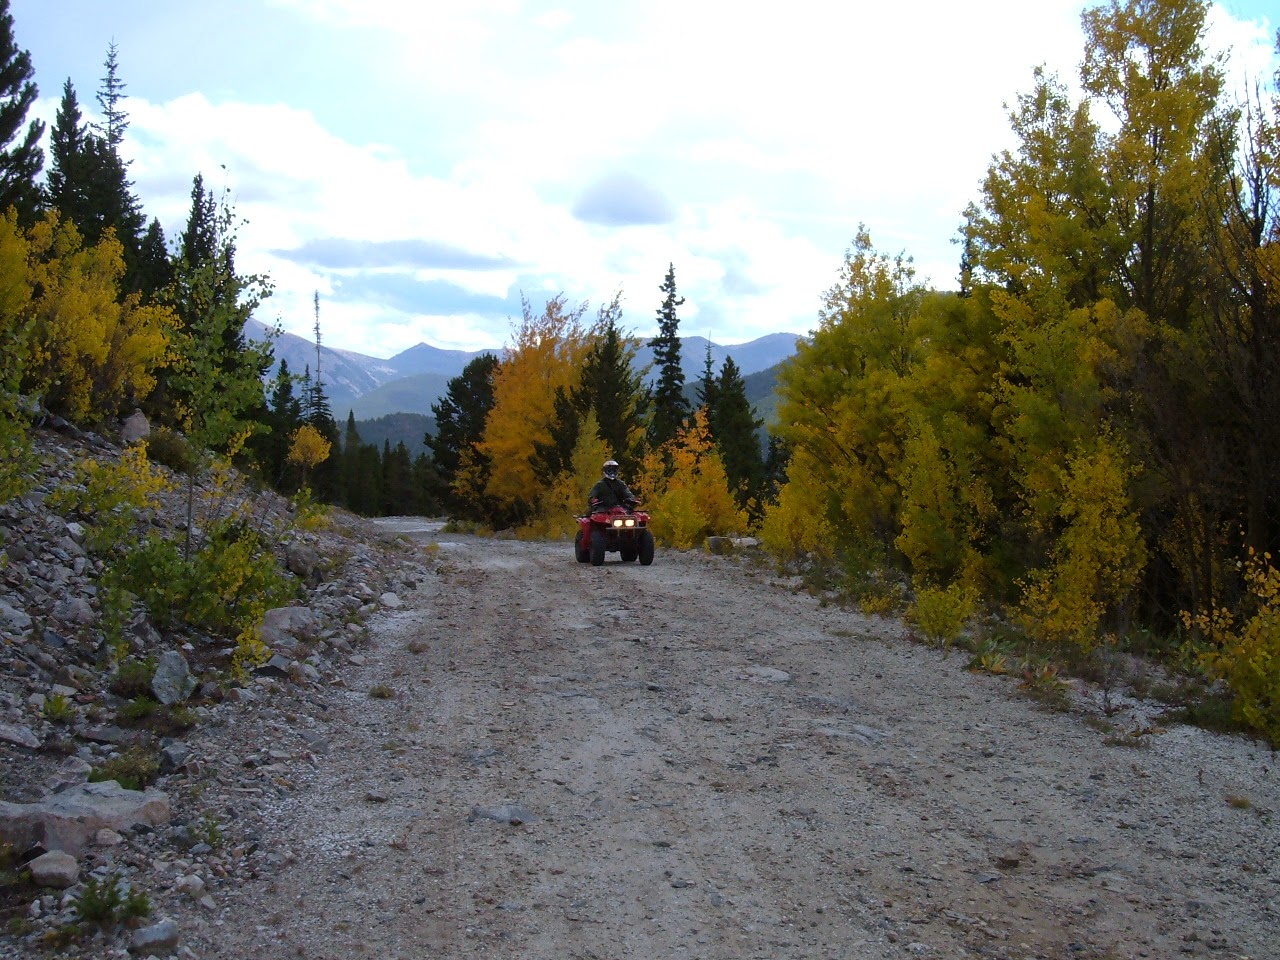 ATV riding along a mountain road with fall colors all around.